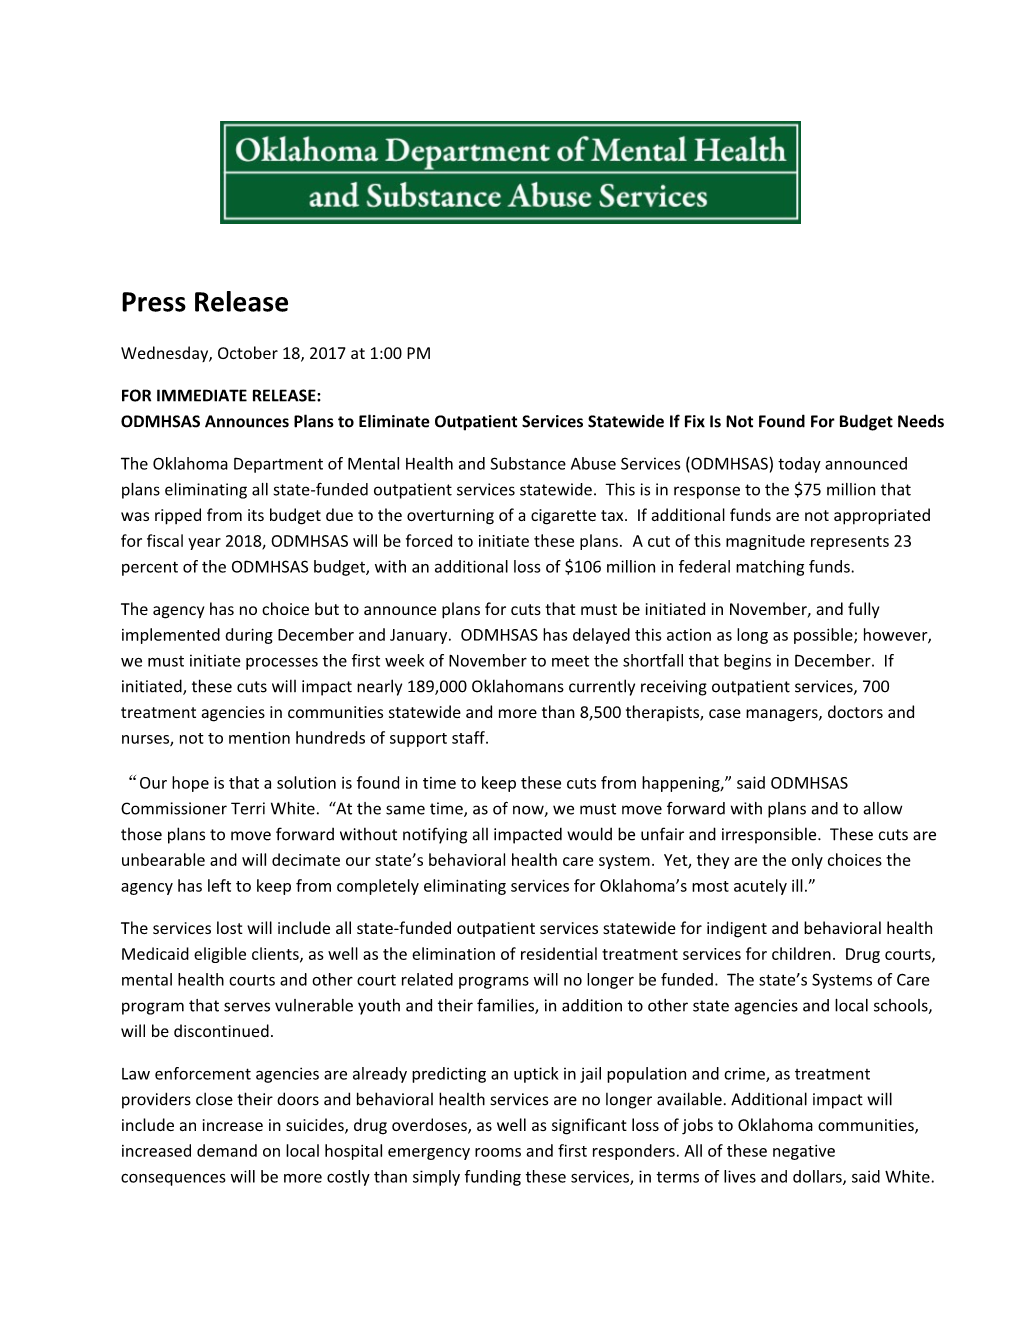 FOR IMMEDIATE RELEASE: ODMHSAS Announces Plans to Eliminate Outpatient Services Statewide